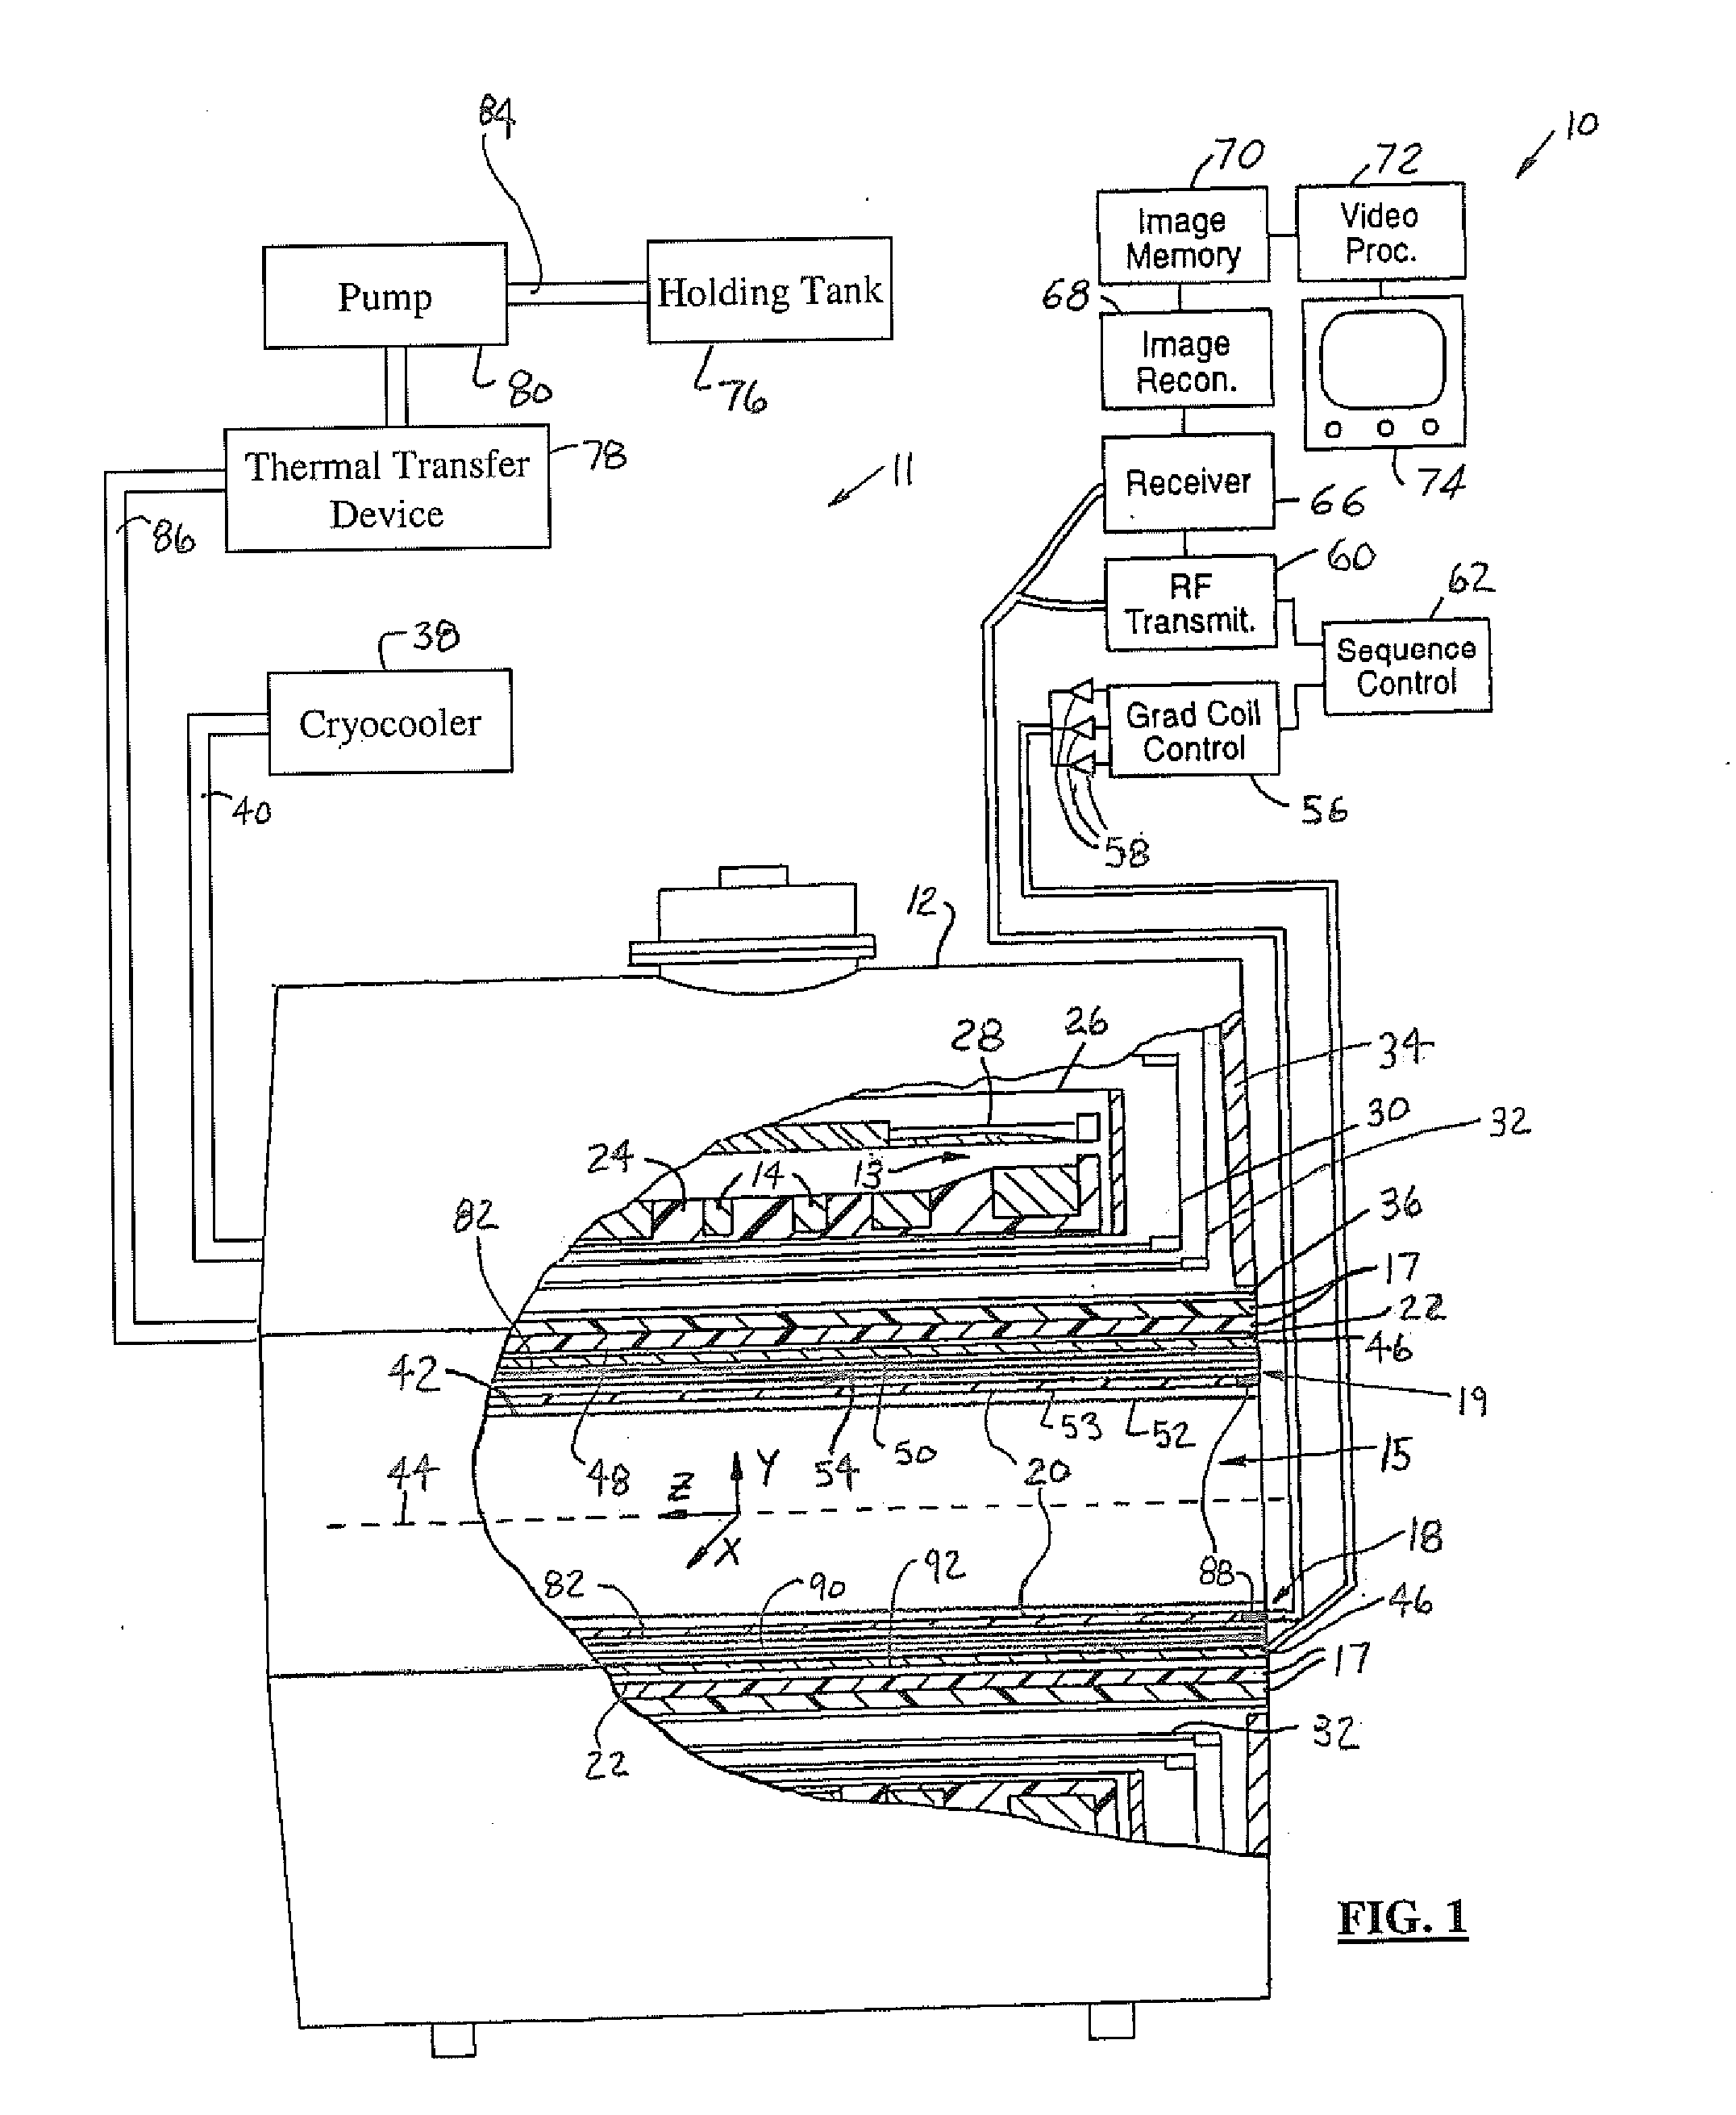 MRI system with liquid cooled RF space